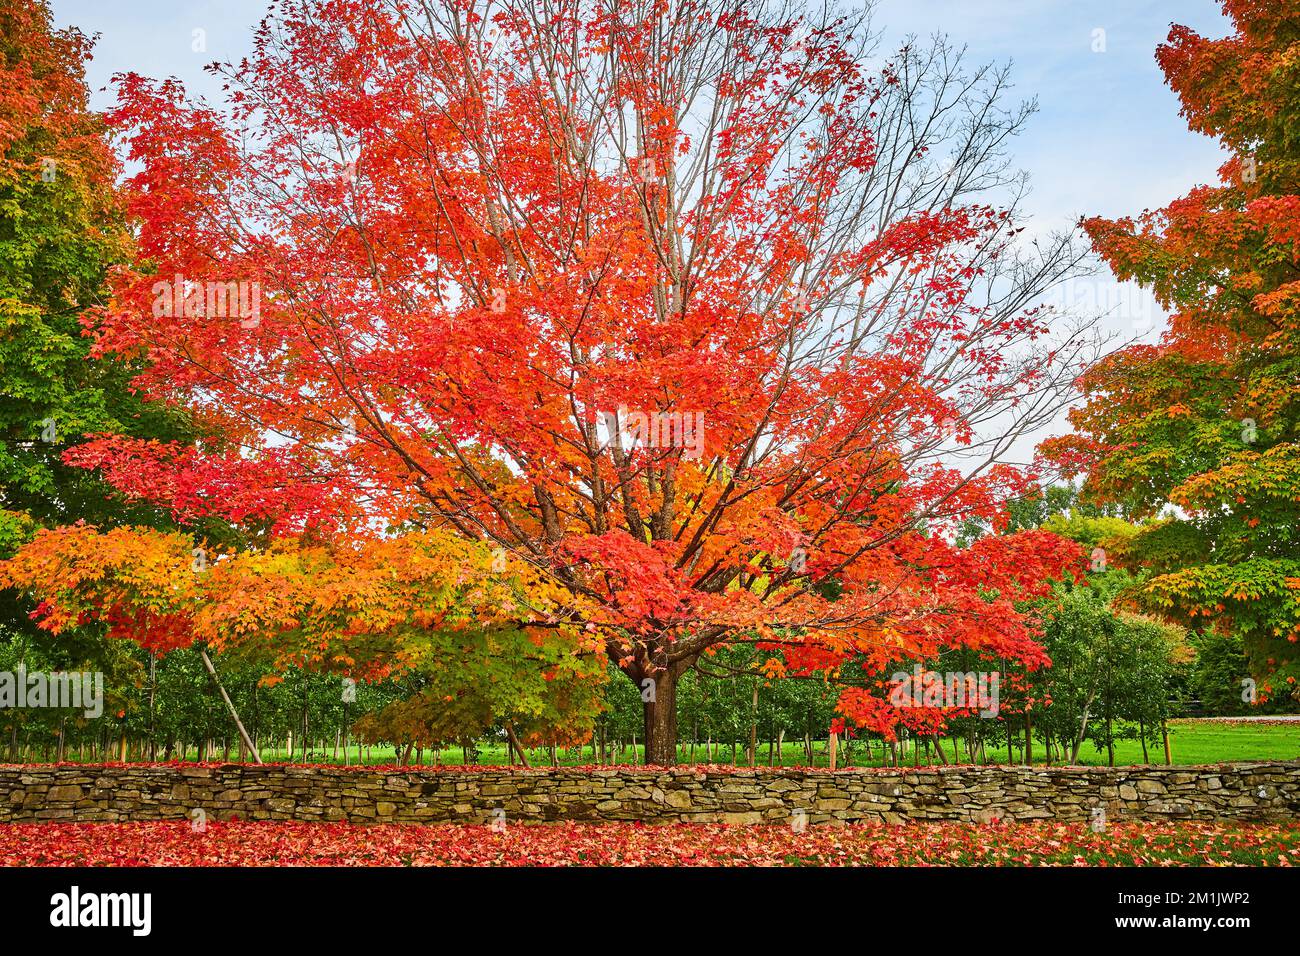 Orchard with stone wall and trees in peak fall with orange and red leaves everywhere Stock Photo